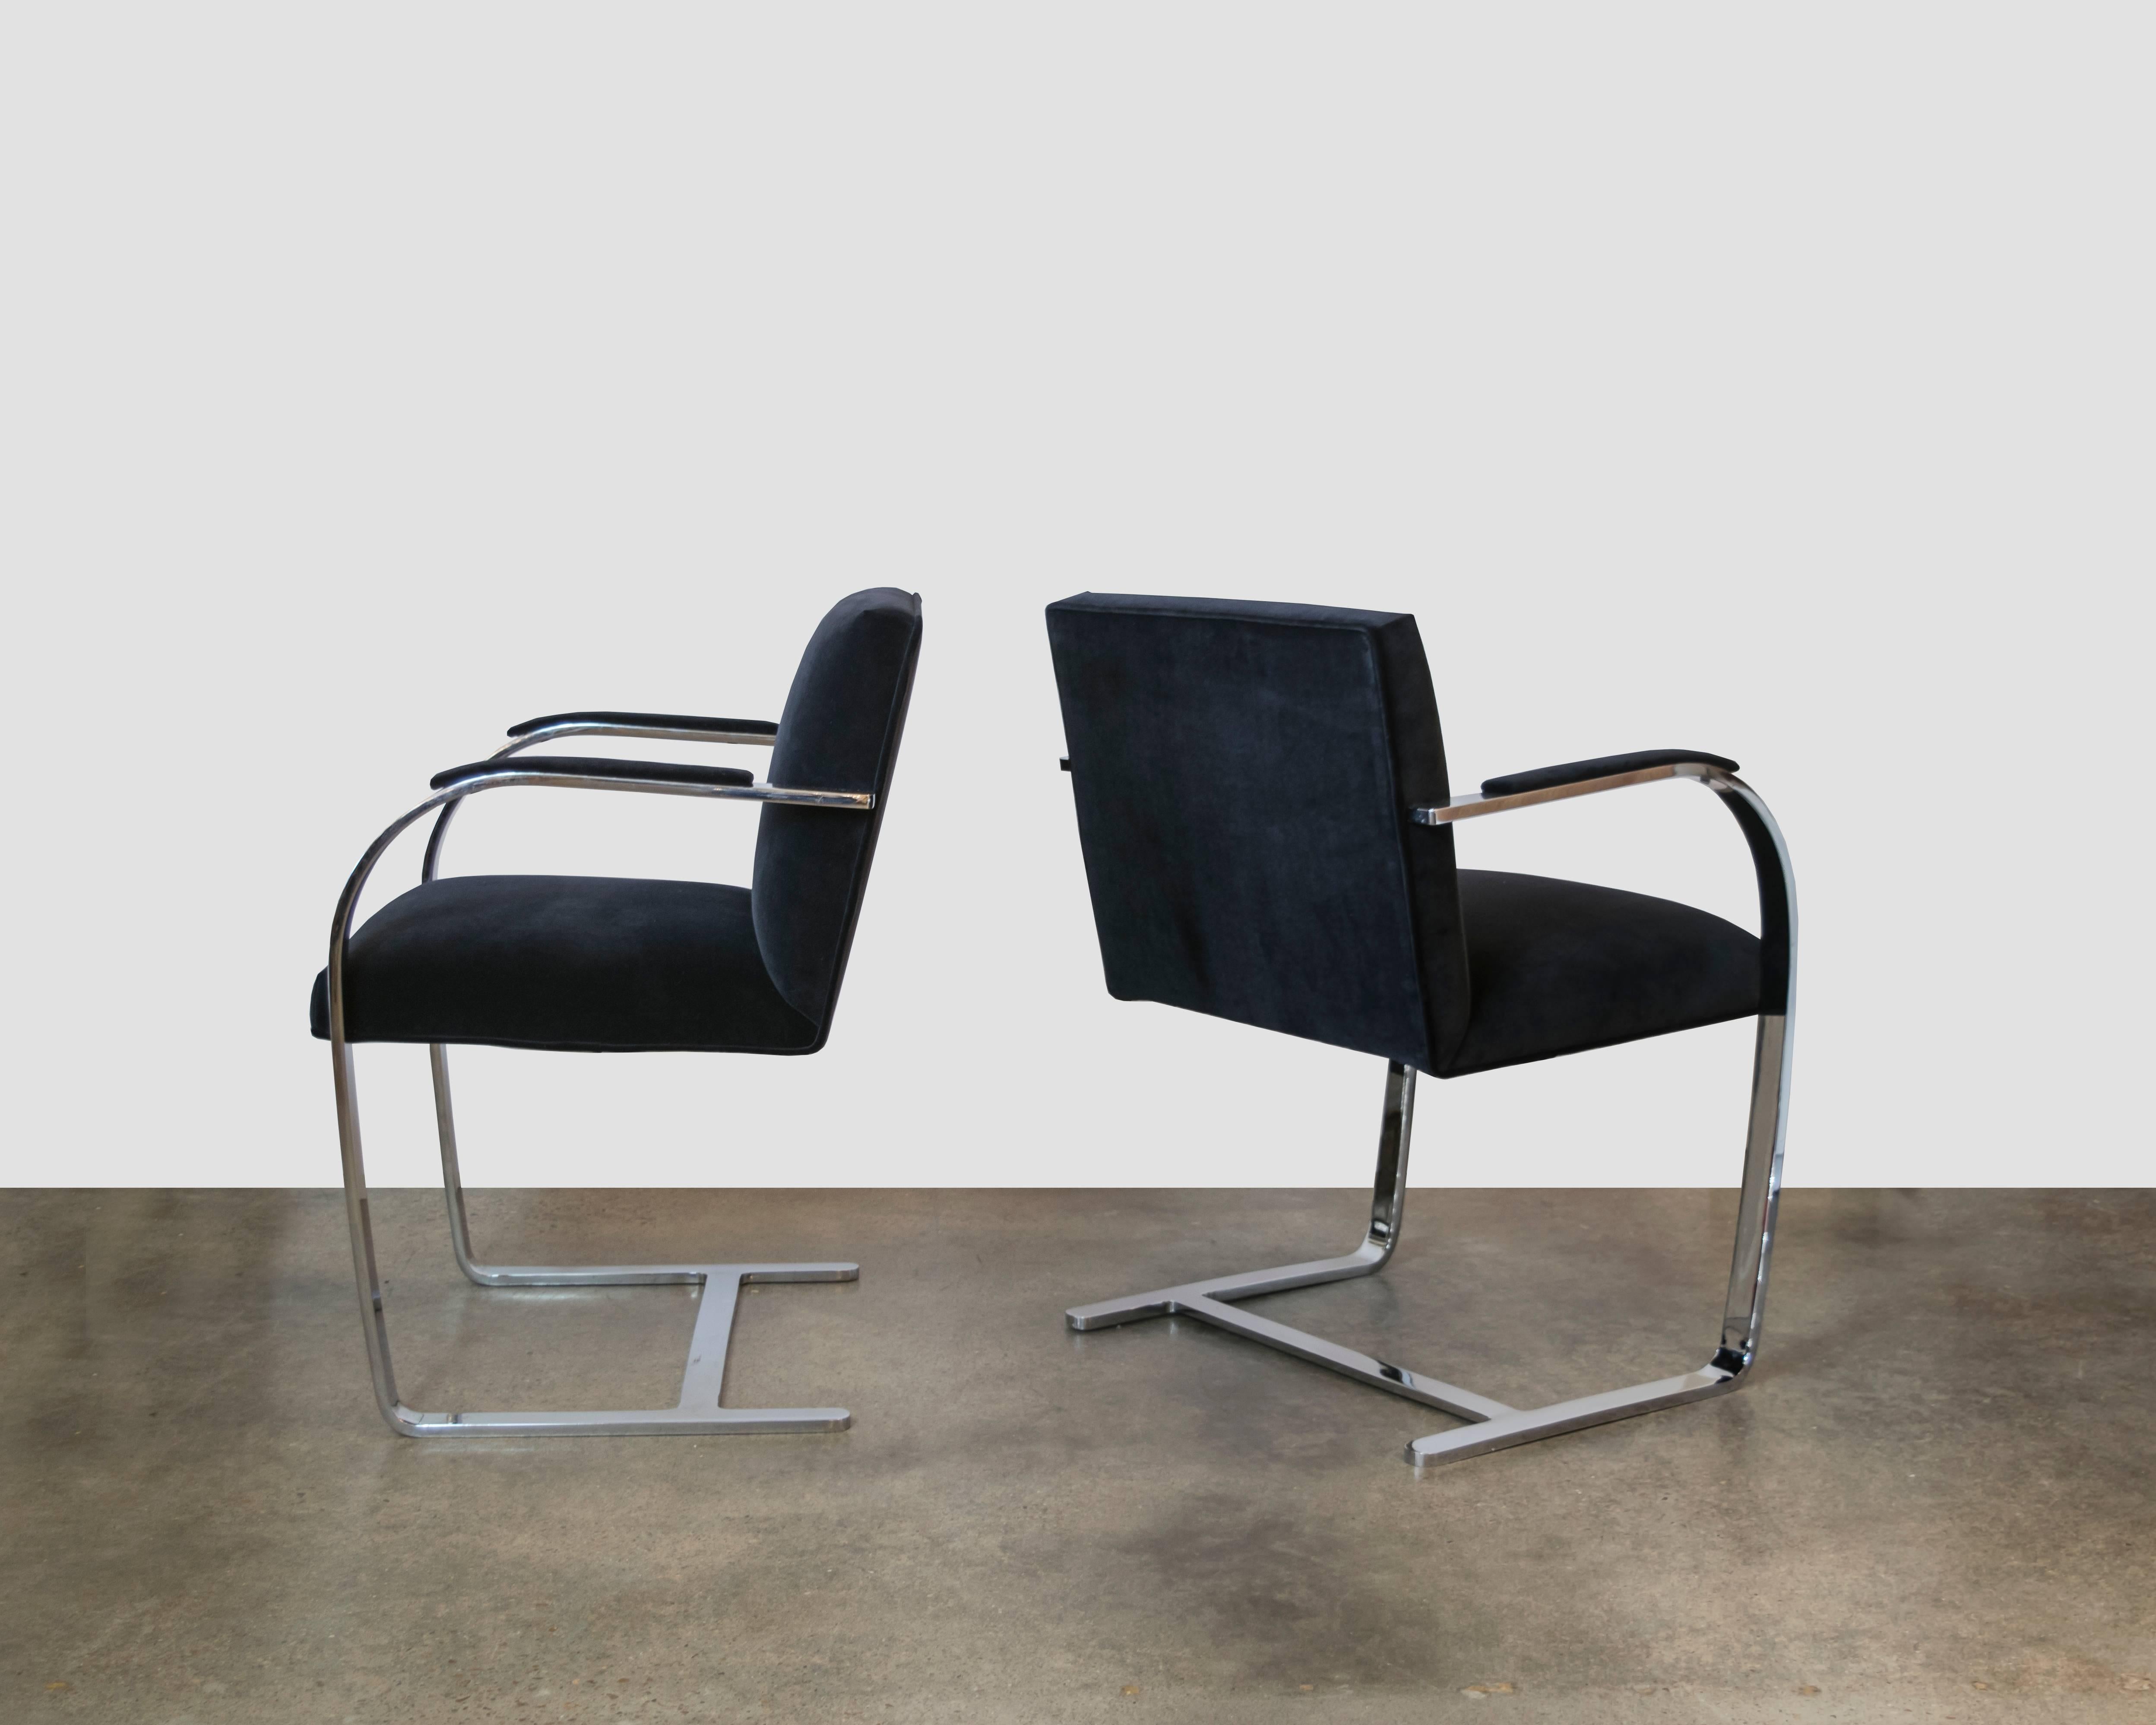 Pair of original Knoll flat bar Brno chairs reupholstered in black velvet. The chrome is in good condition, some minor pitting and wear on the top of the foot rest. Otherwise no rust or serious scratches.